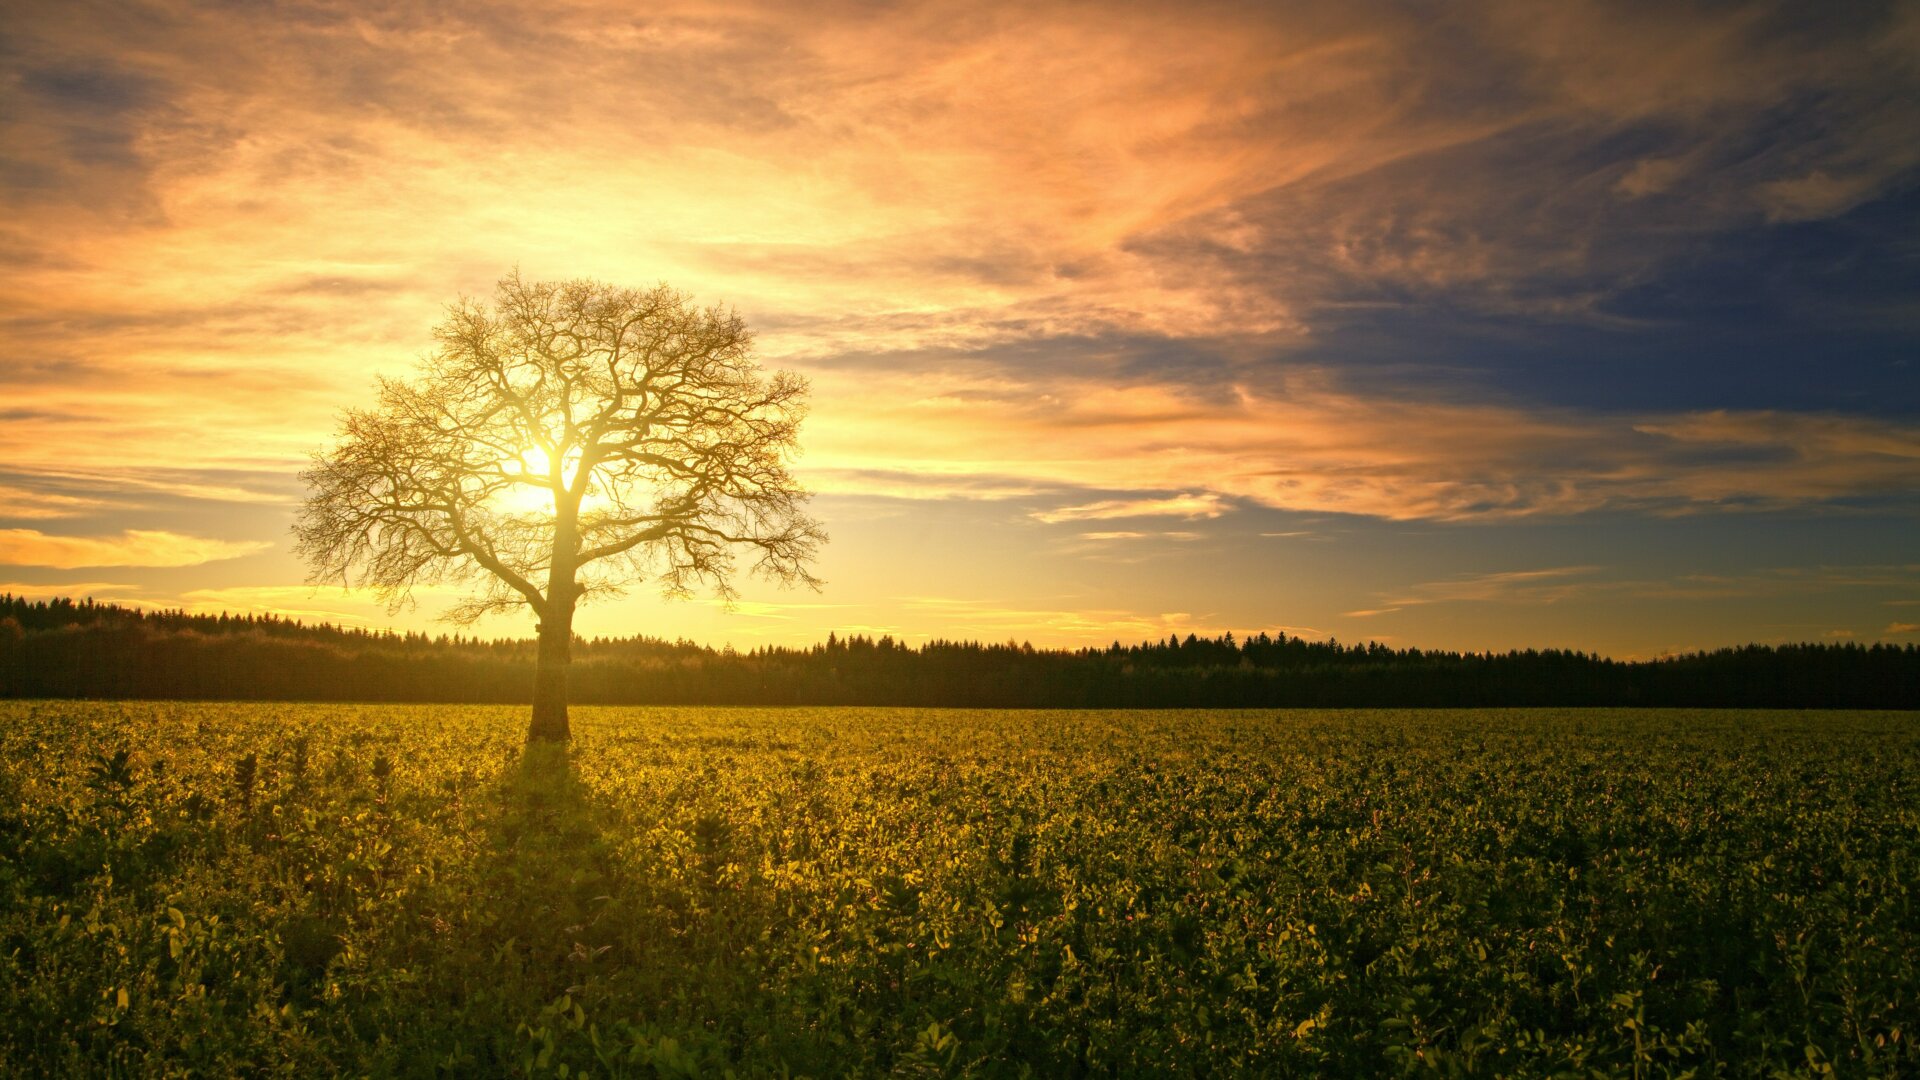 The sun sets on an empty field, except for the presence of a single, healthy tree. As the sun sets, the remaining daylight illuminates the tree. This image signifies that despite its circumstances, the tree is still thriving.